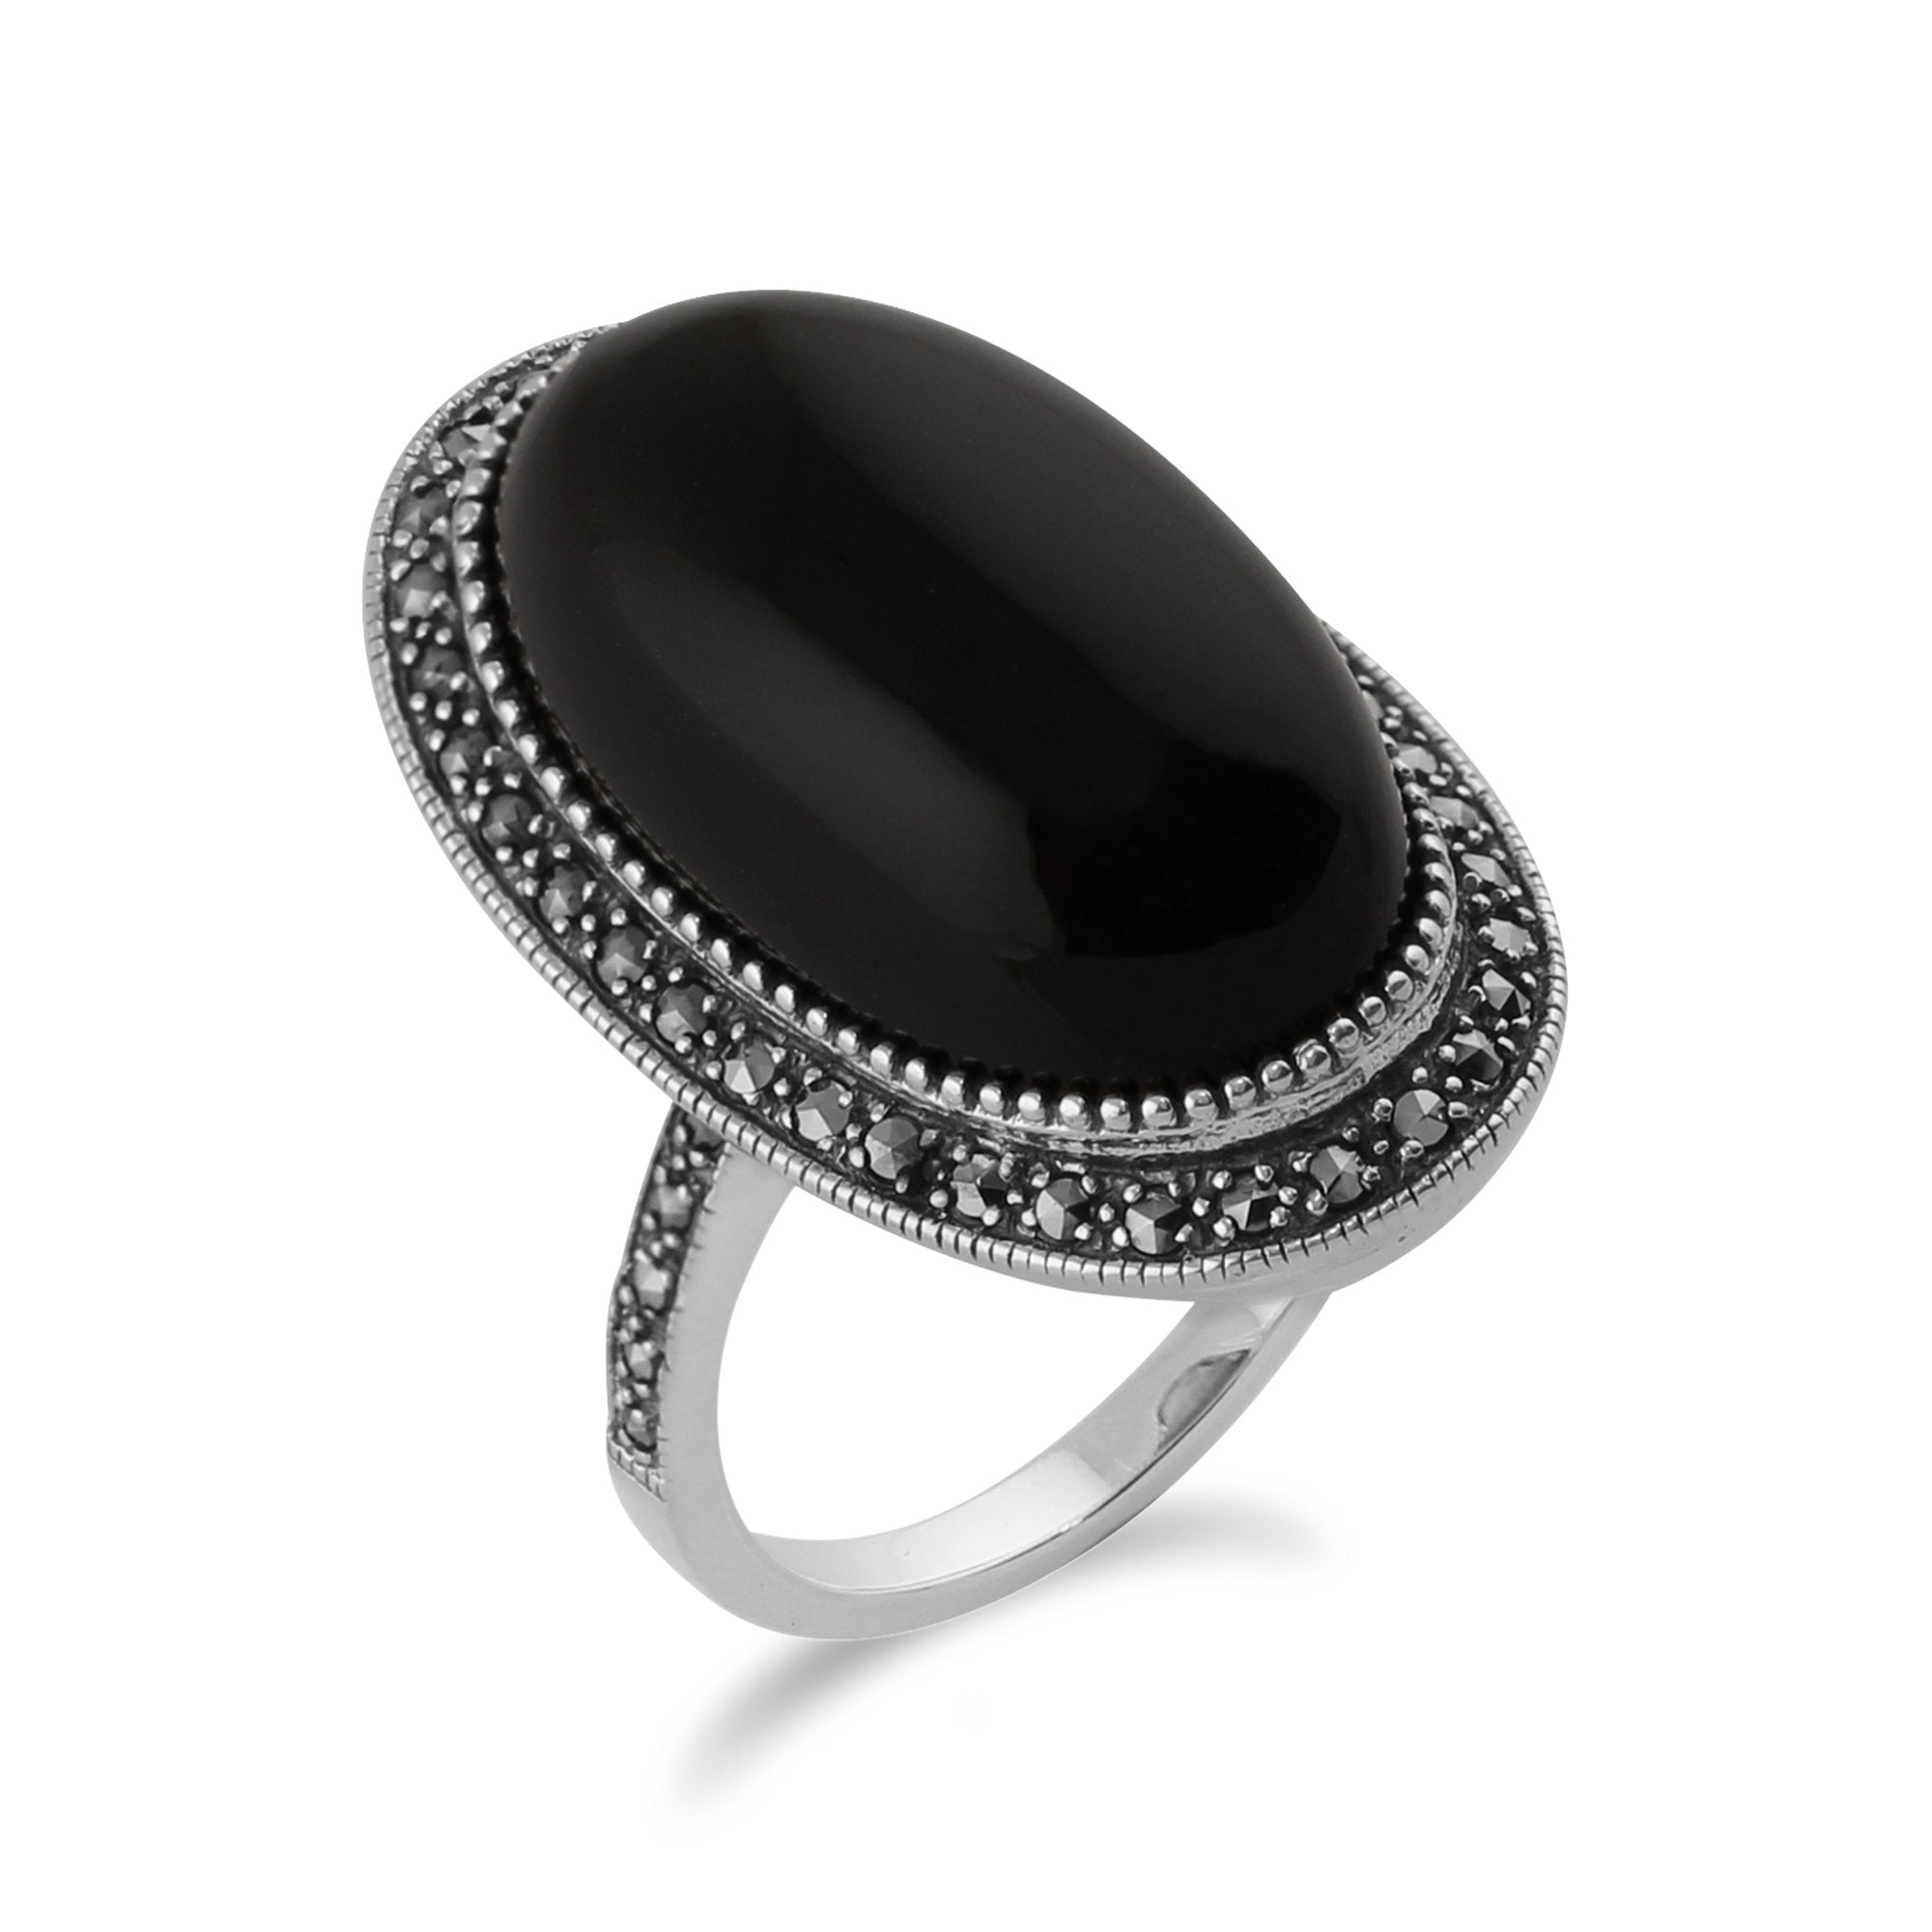 Art Deco Style Black Onyx Cabochon & Marcasite Cocktail Ring